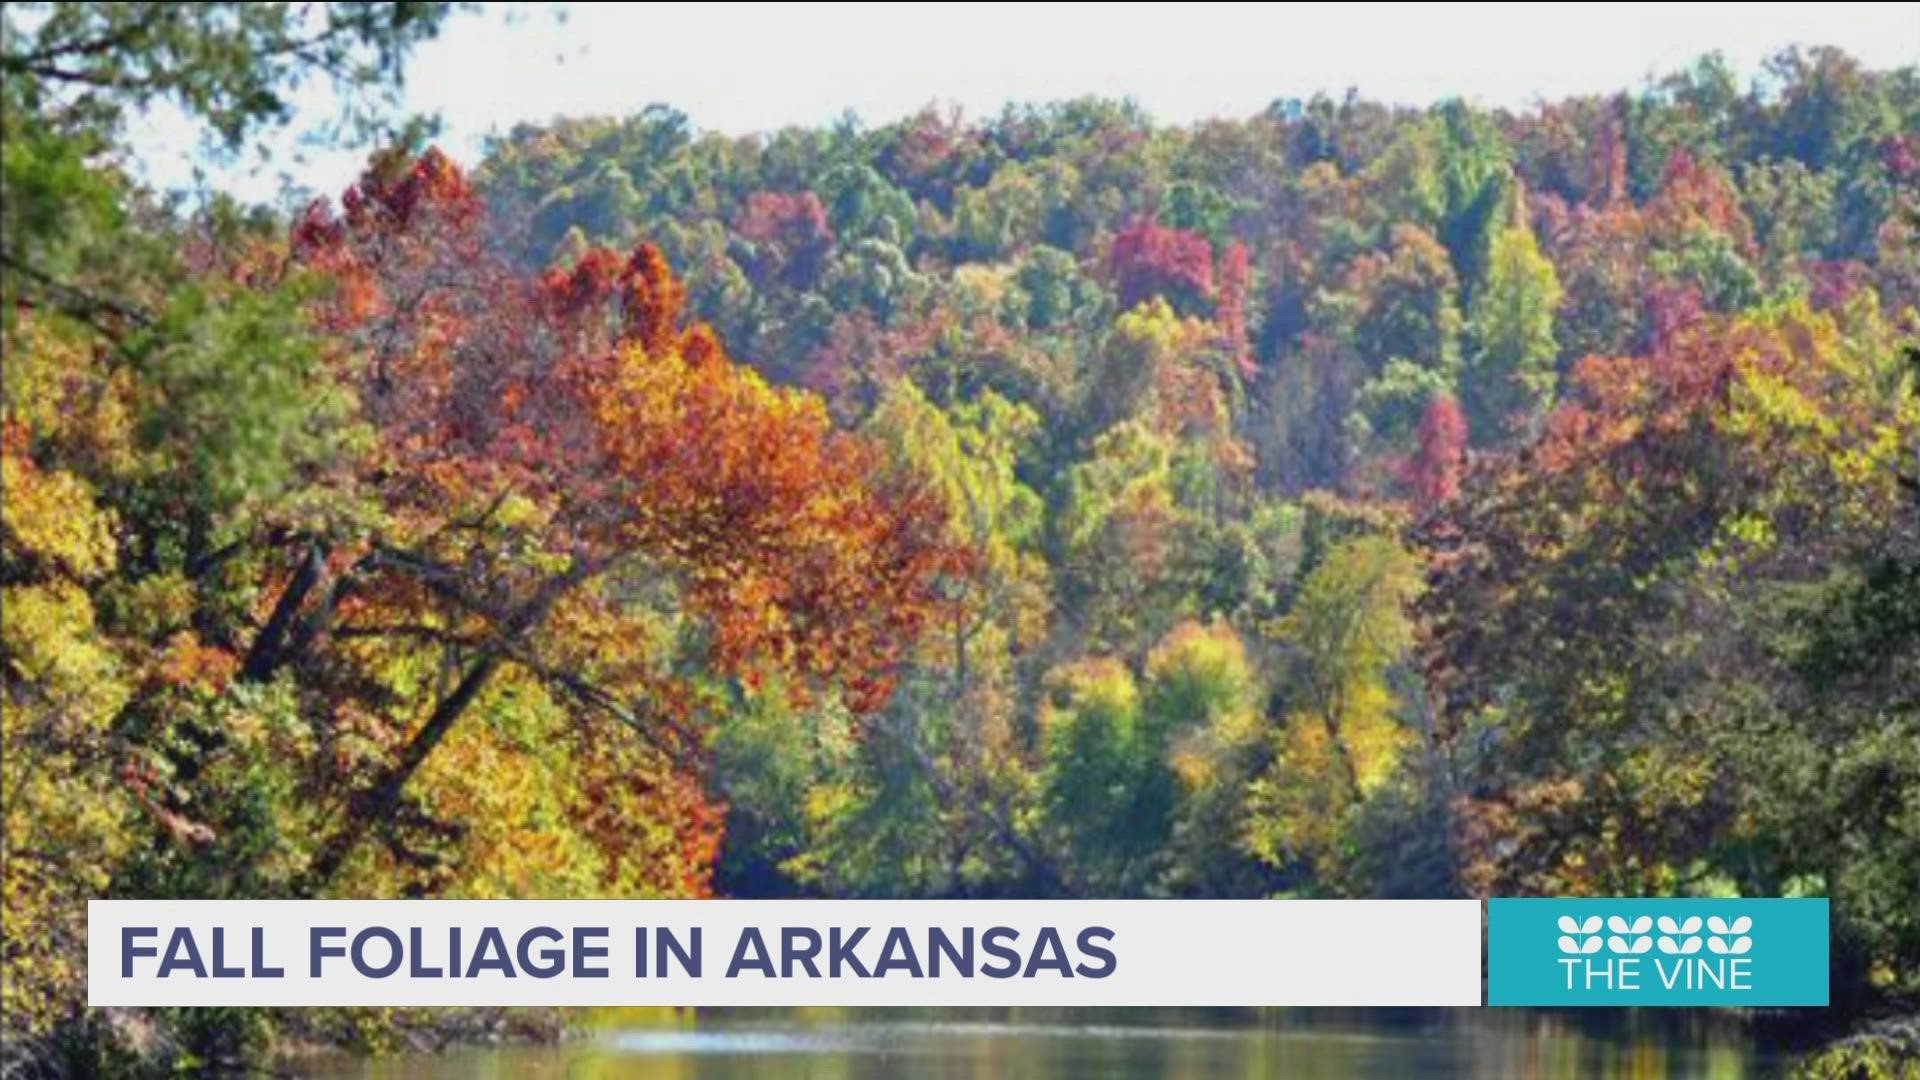 Arkansas is one of the top fall color destinations in the country and USA Today recently named Arkansas one of the top places to view fall color.